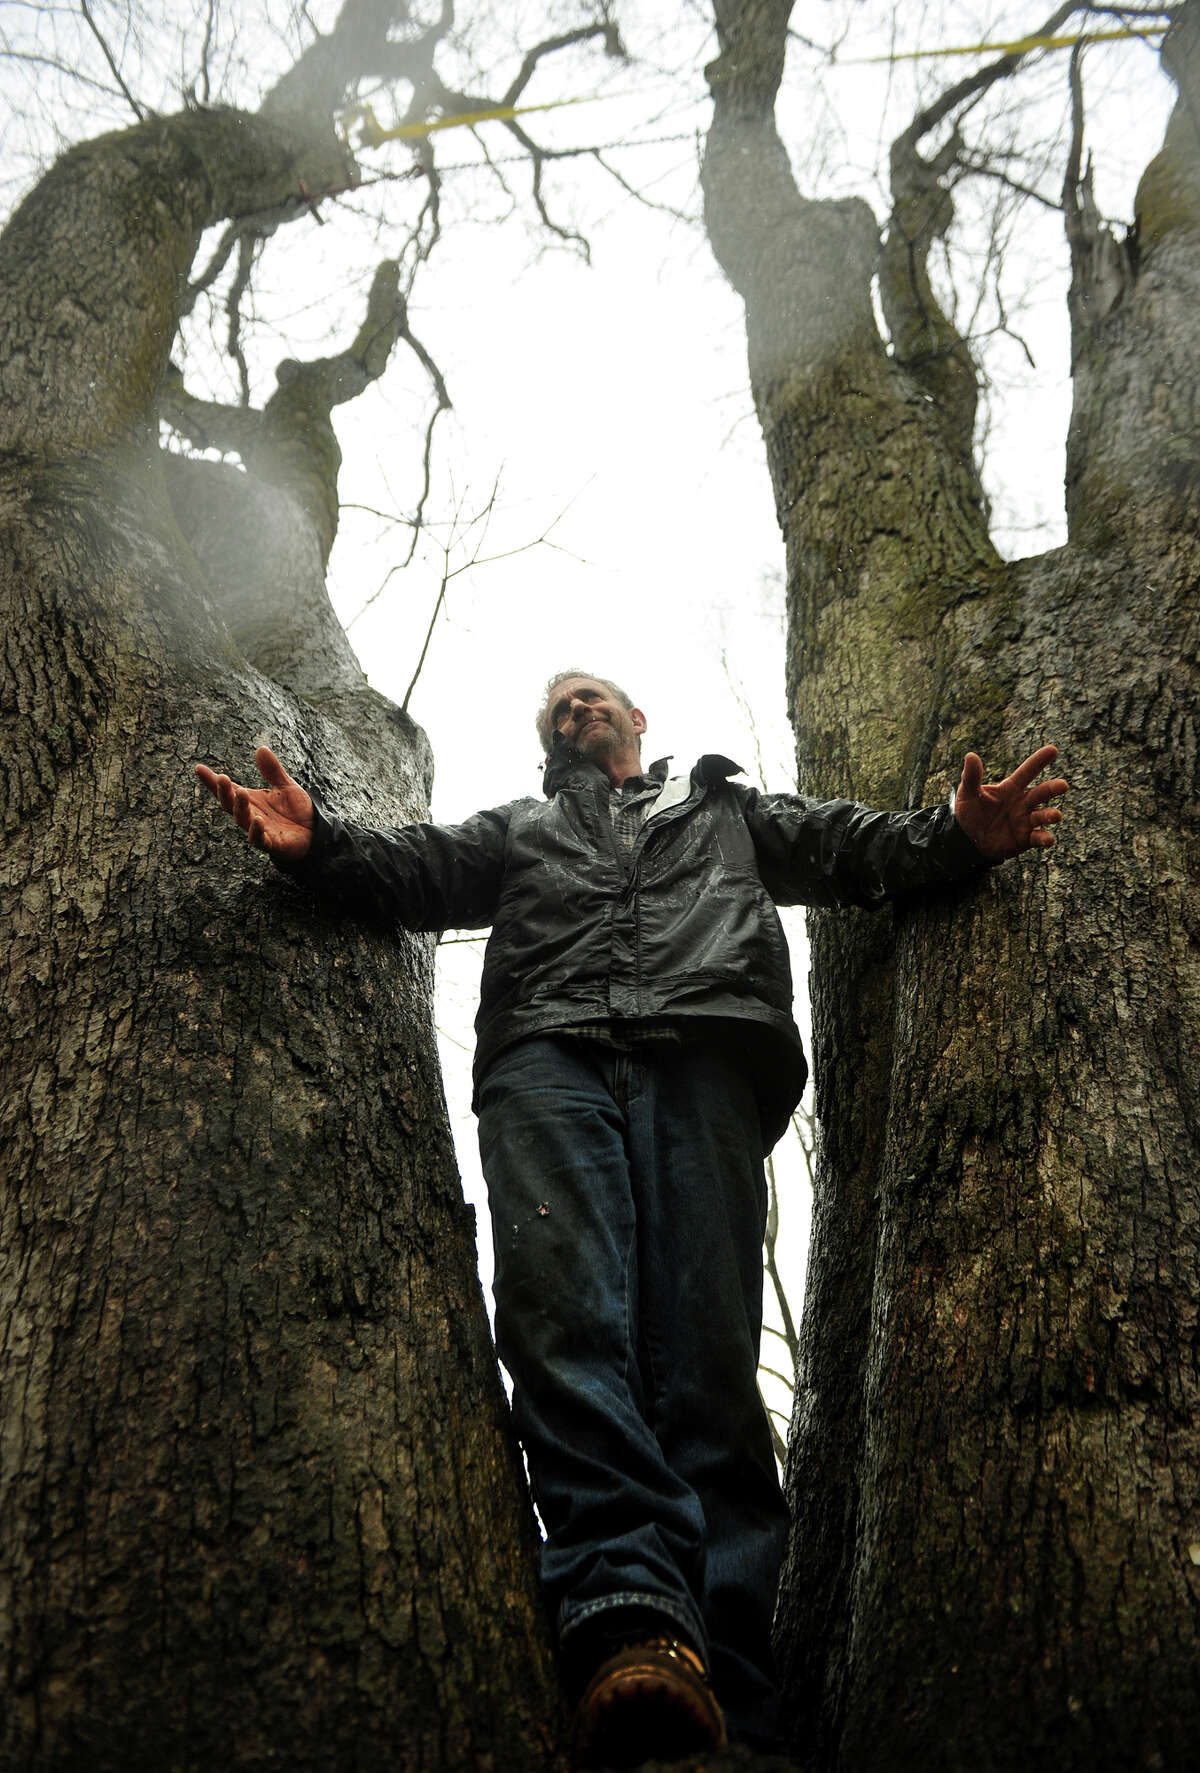 Former Easton tree warden Rich McLaughlin stands in the crotch of a white oak tree that he is trying to save from town removal on Glovers Lane in Easton on Tuesday, March 12, 2013.